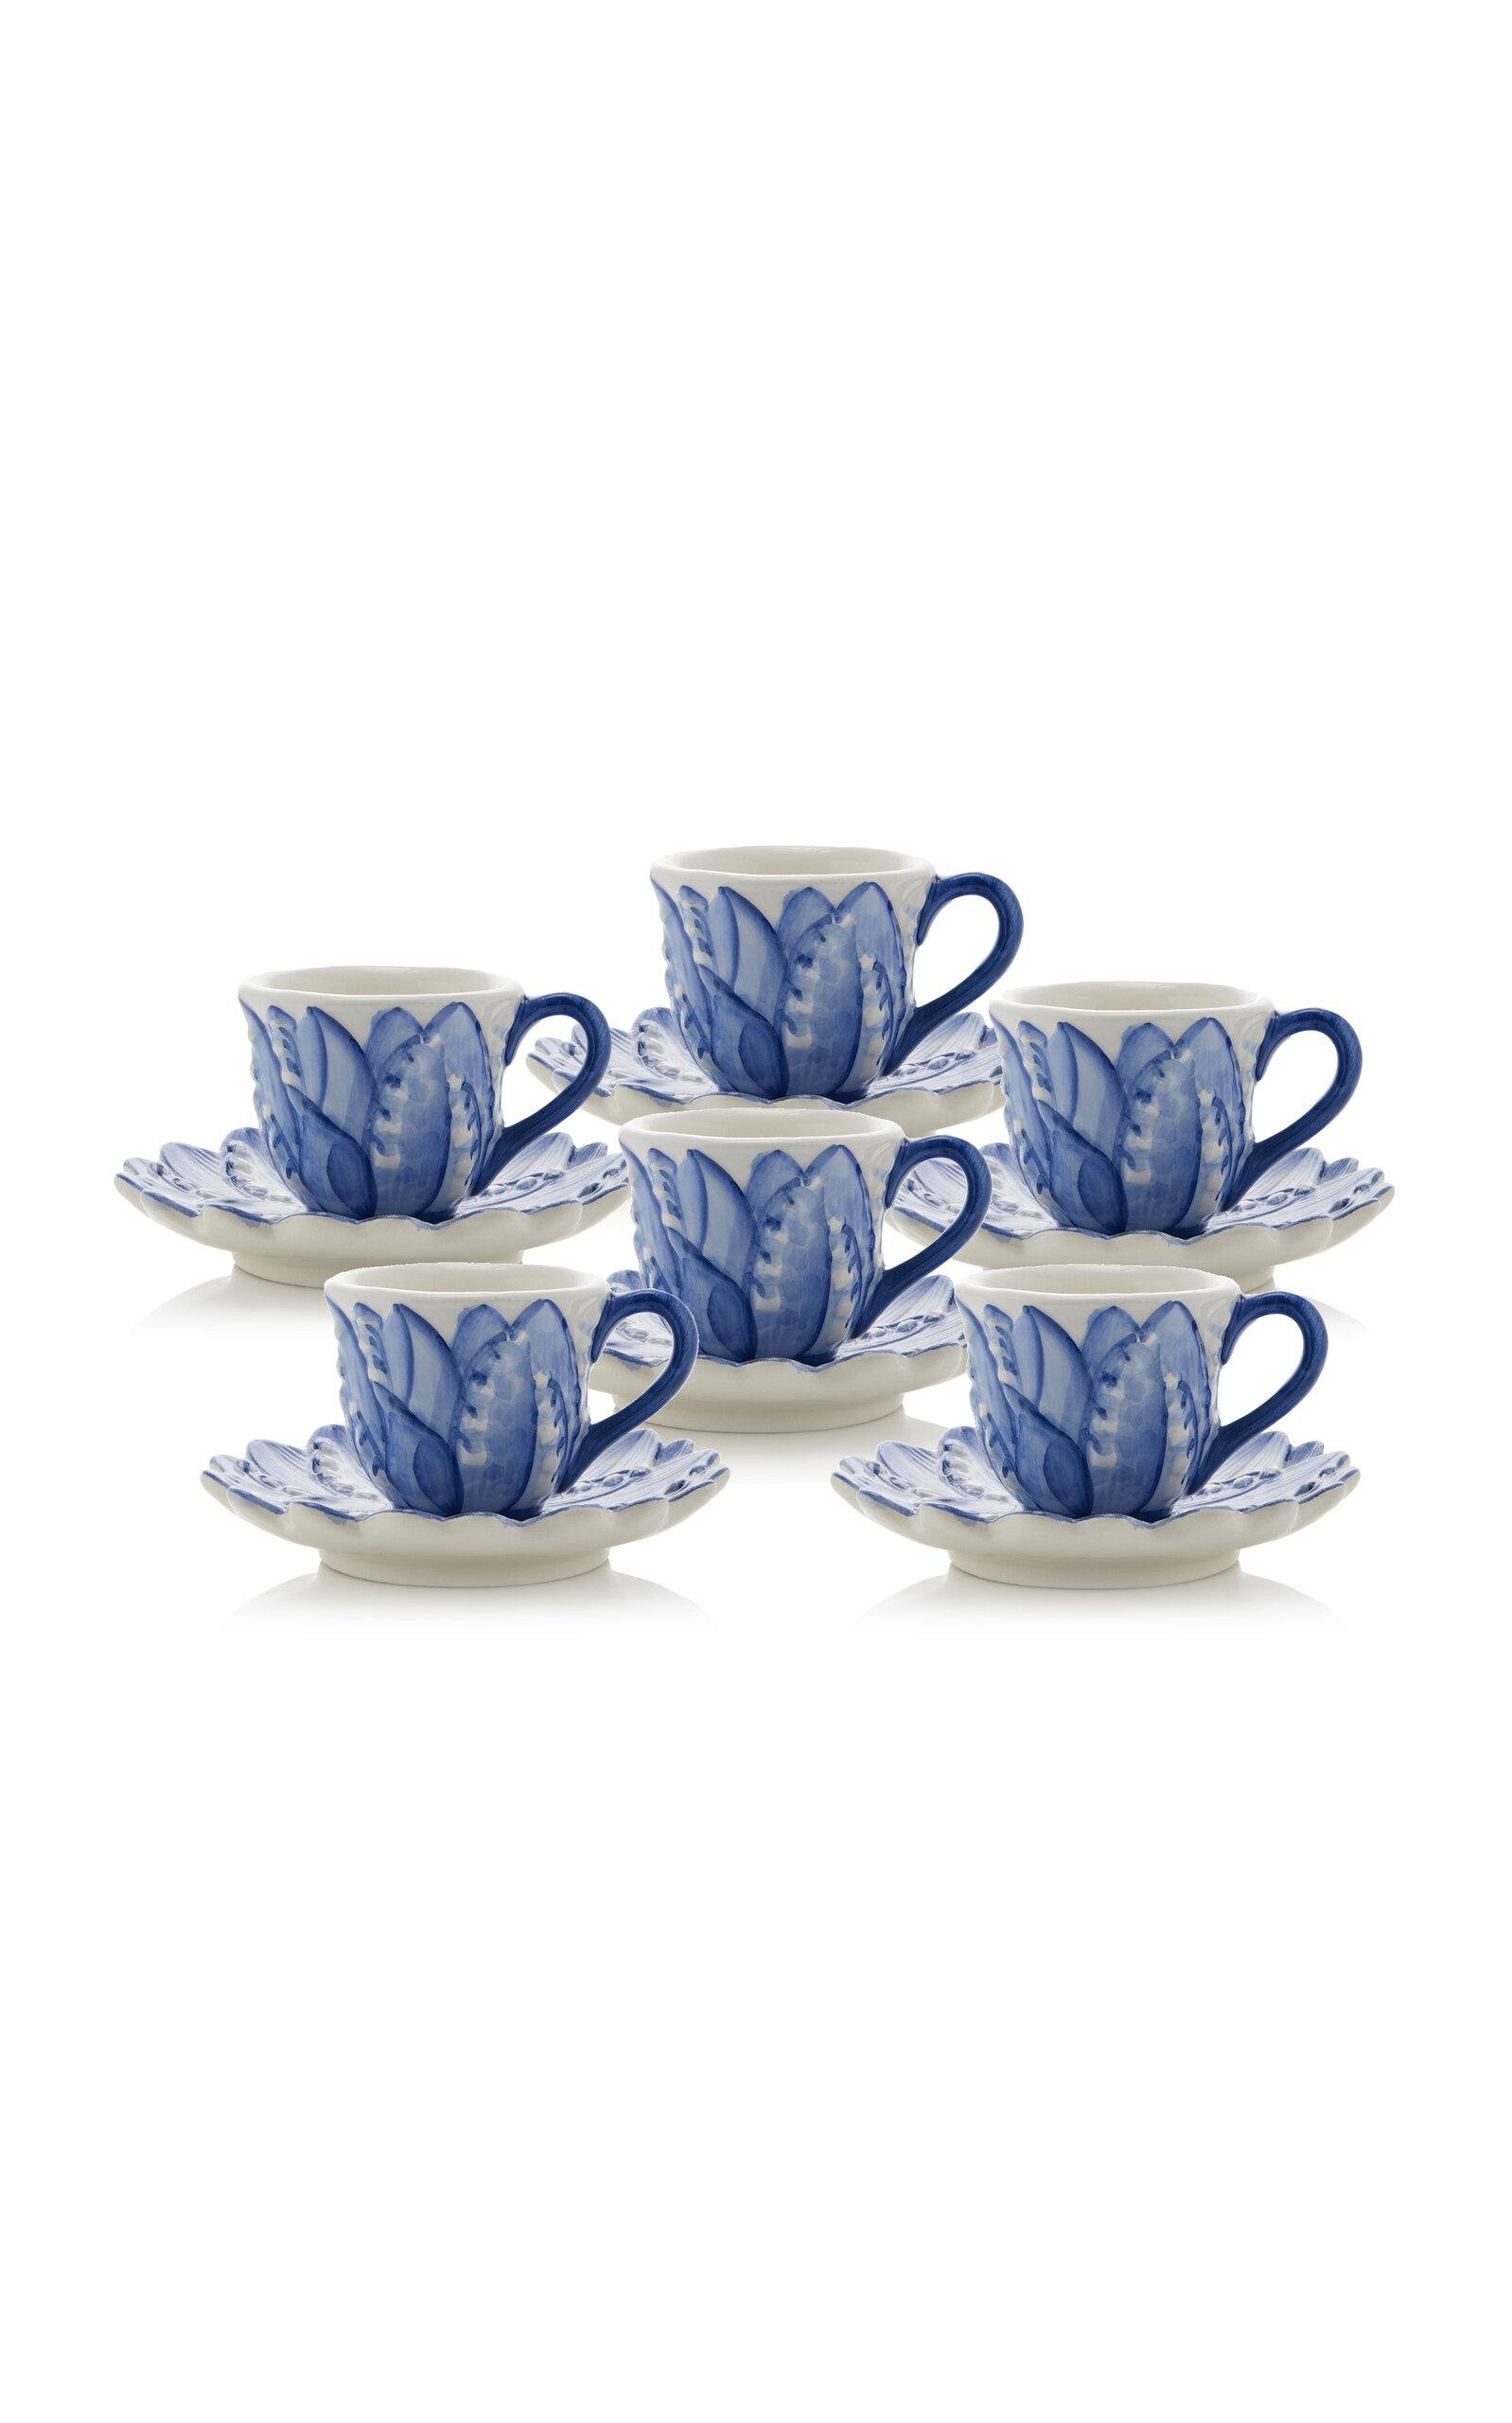 Moda Domus - Set-of-Six Hand-Painted Lily of The Valley Ceramic Espresso Cup and Saucer - Blue - Moda Operandi by MODA DOMUS